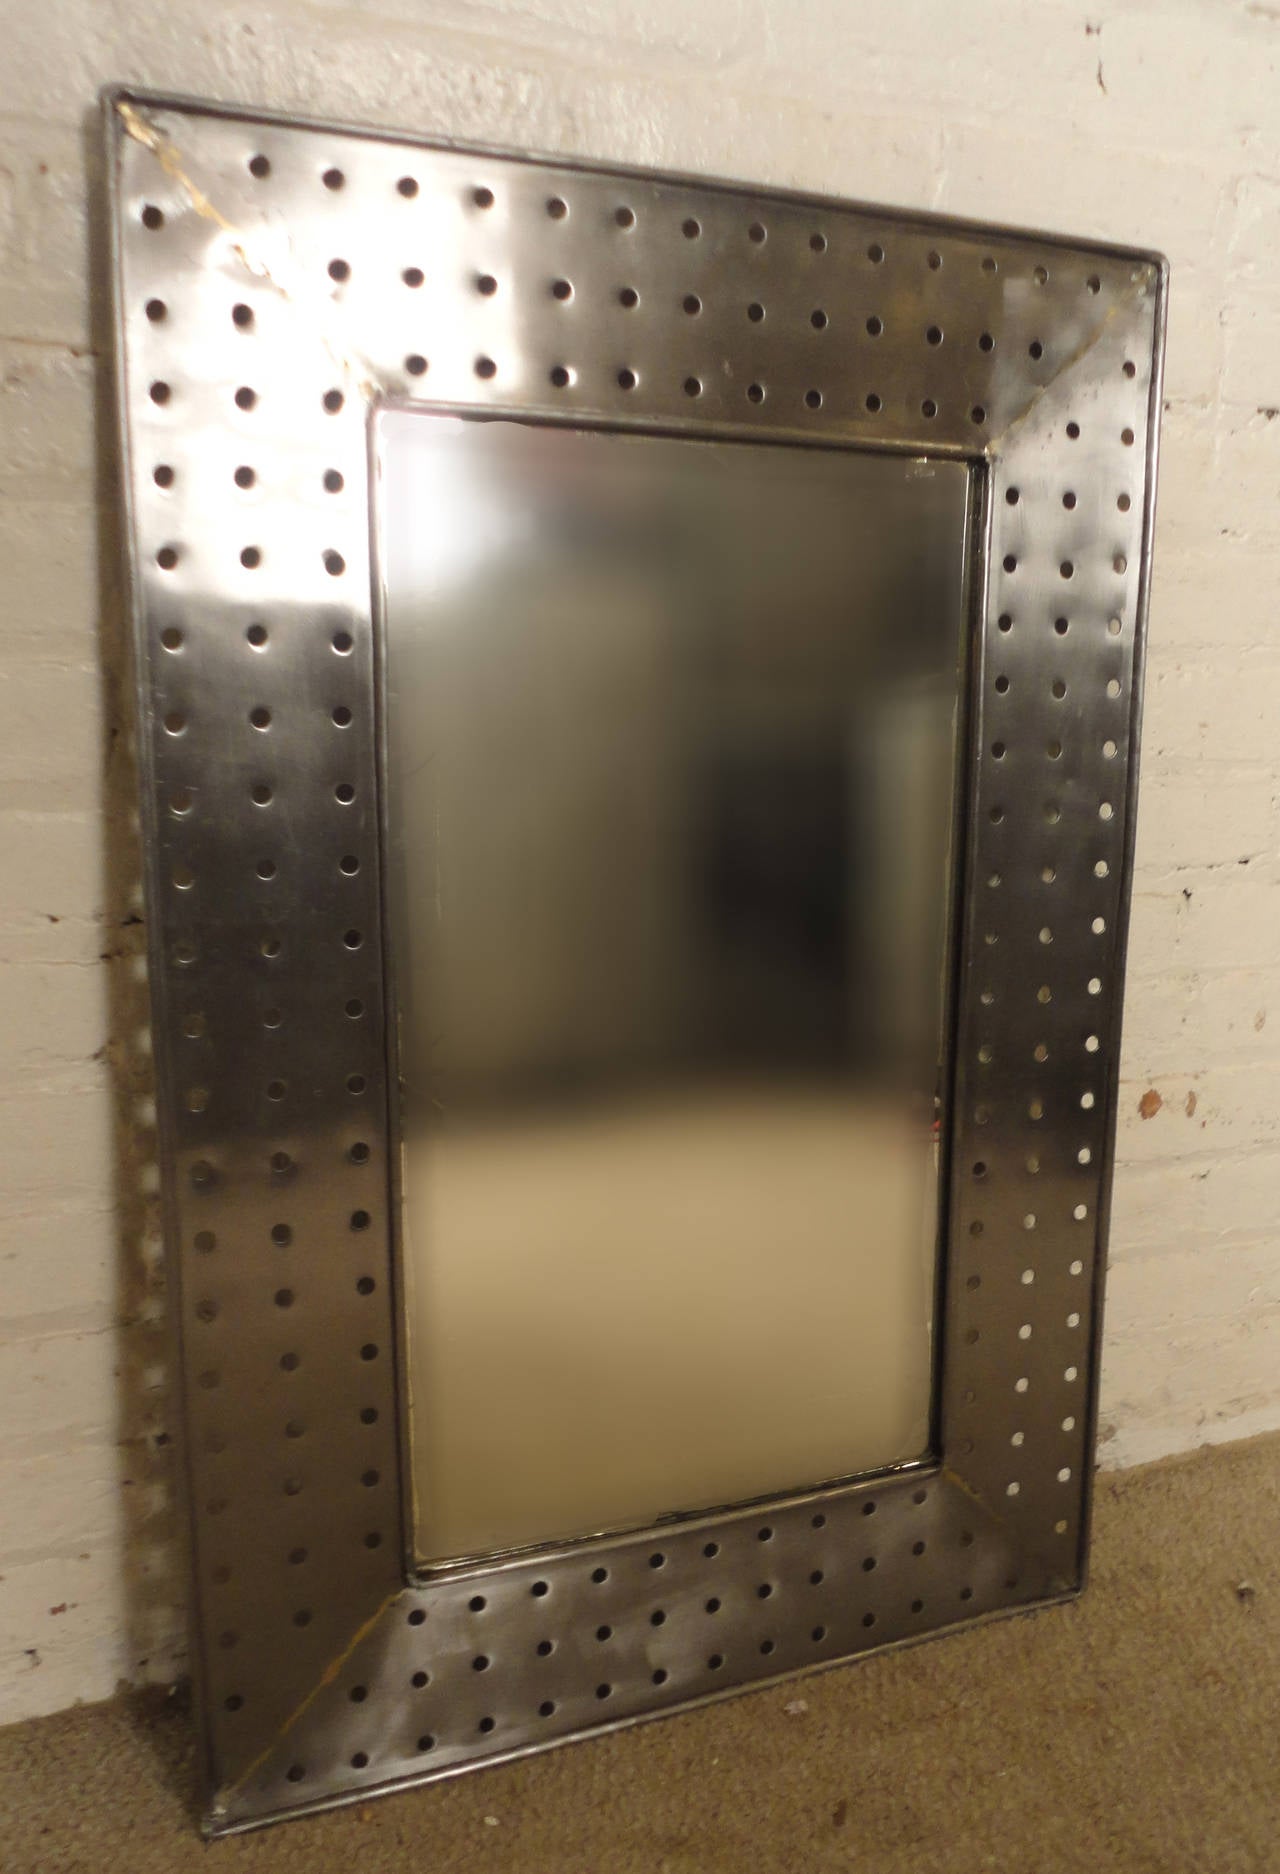 Unique metal mirror with hole punched border. A striking addition to any modern home or office.

(Please confirm item location - NY or NJ - with dealer)